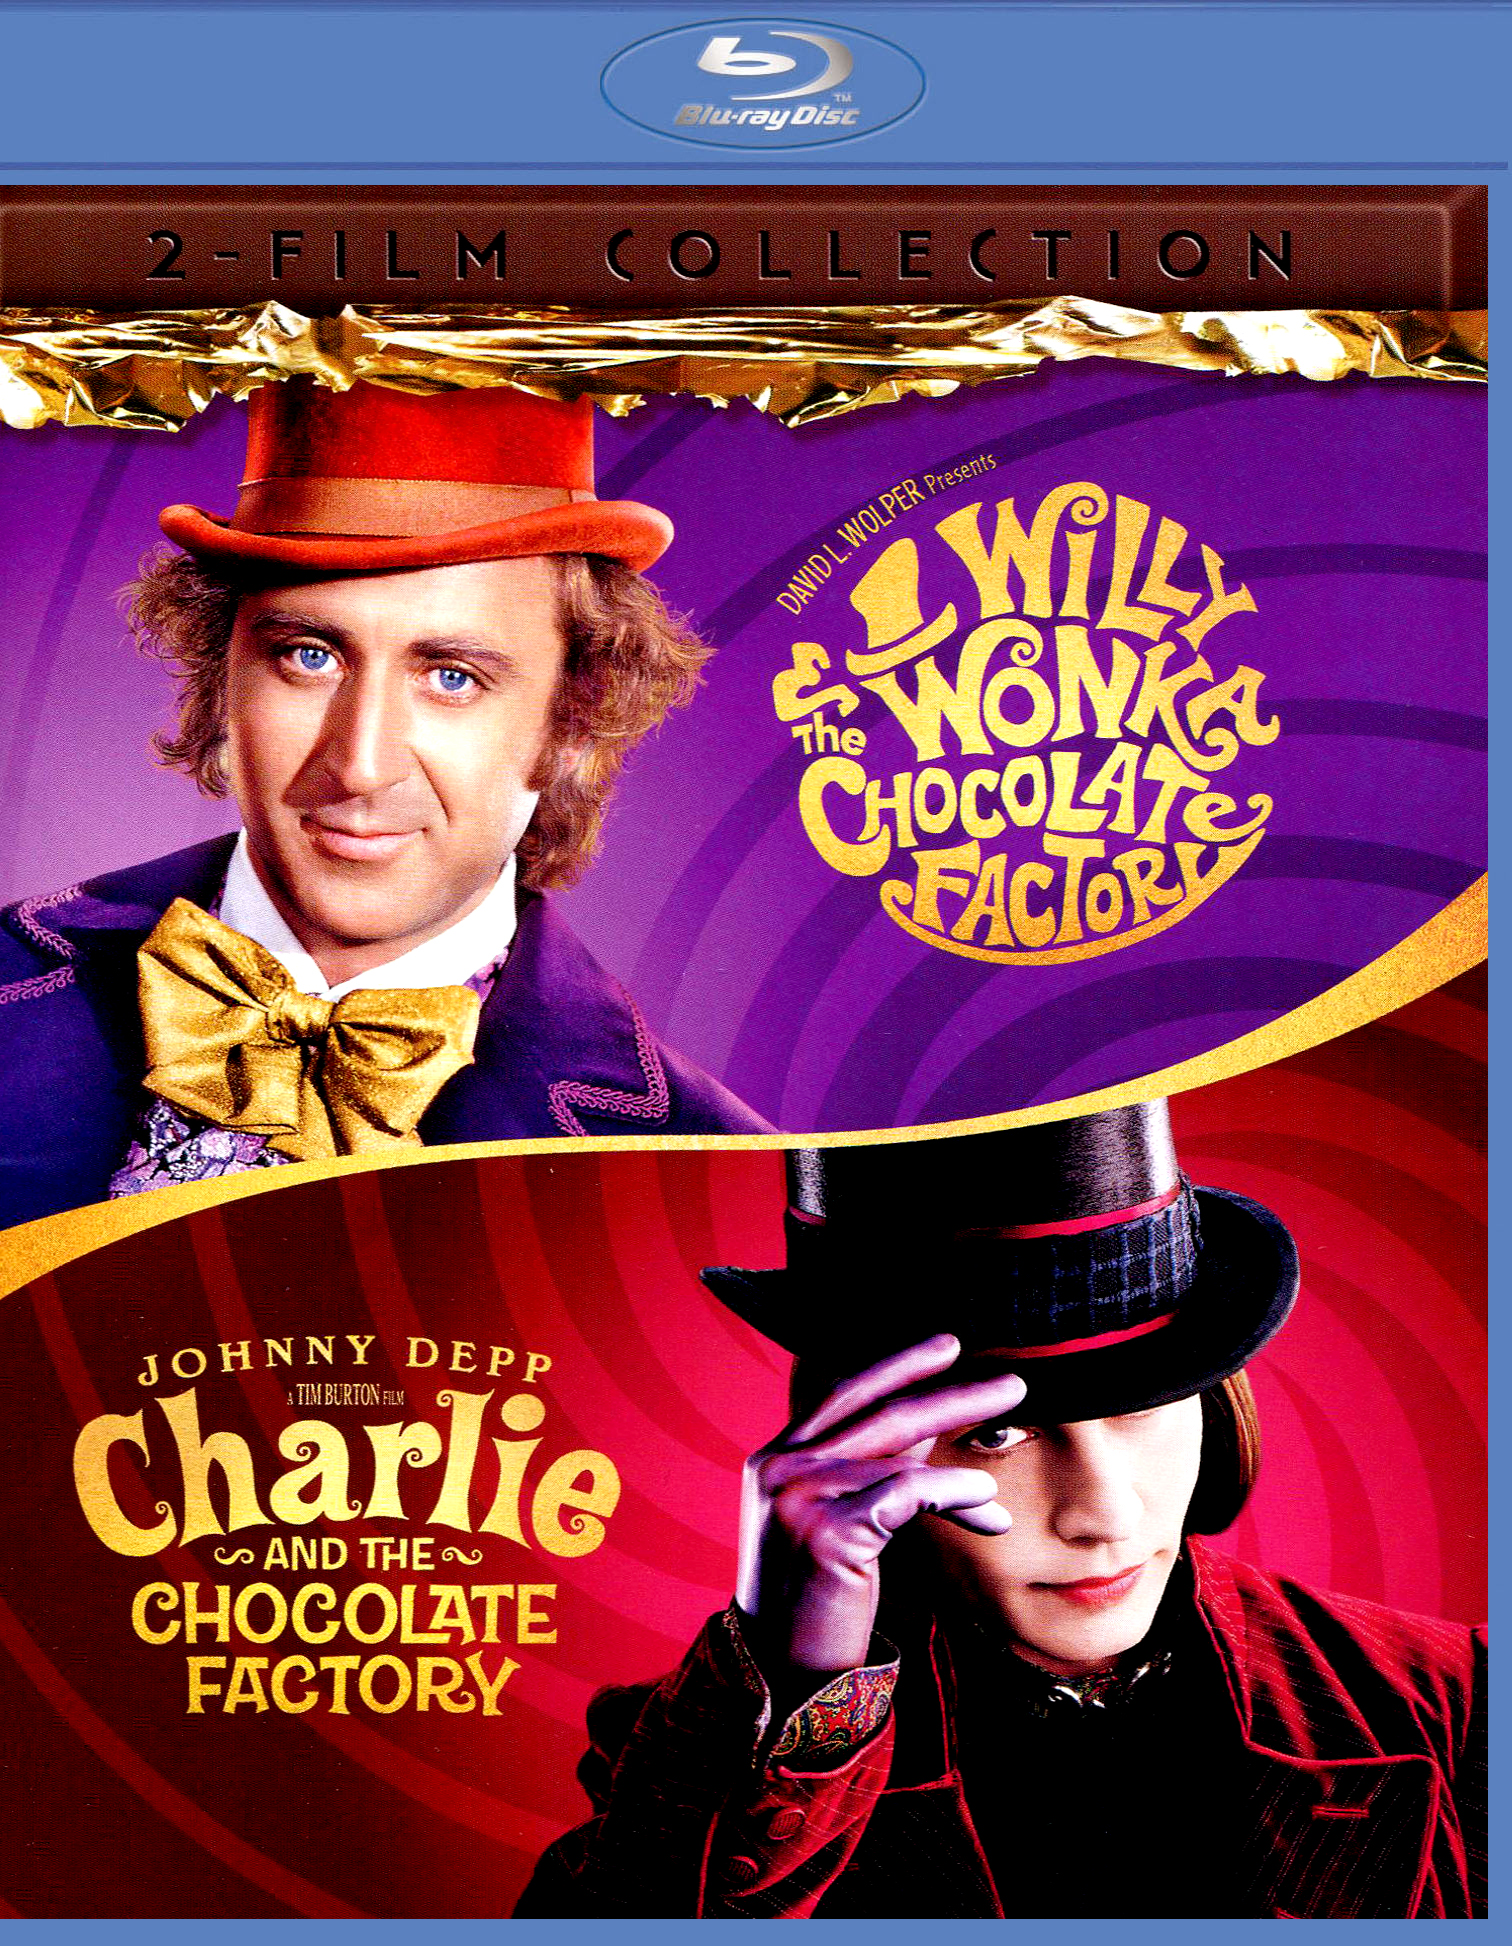 Collection　Willy　Factory　the　Factory/Charlie　2-Film　Chocolate　Best　Wonka　the　and　[Blu-ray]　Buy　and　Chocolate